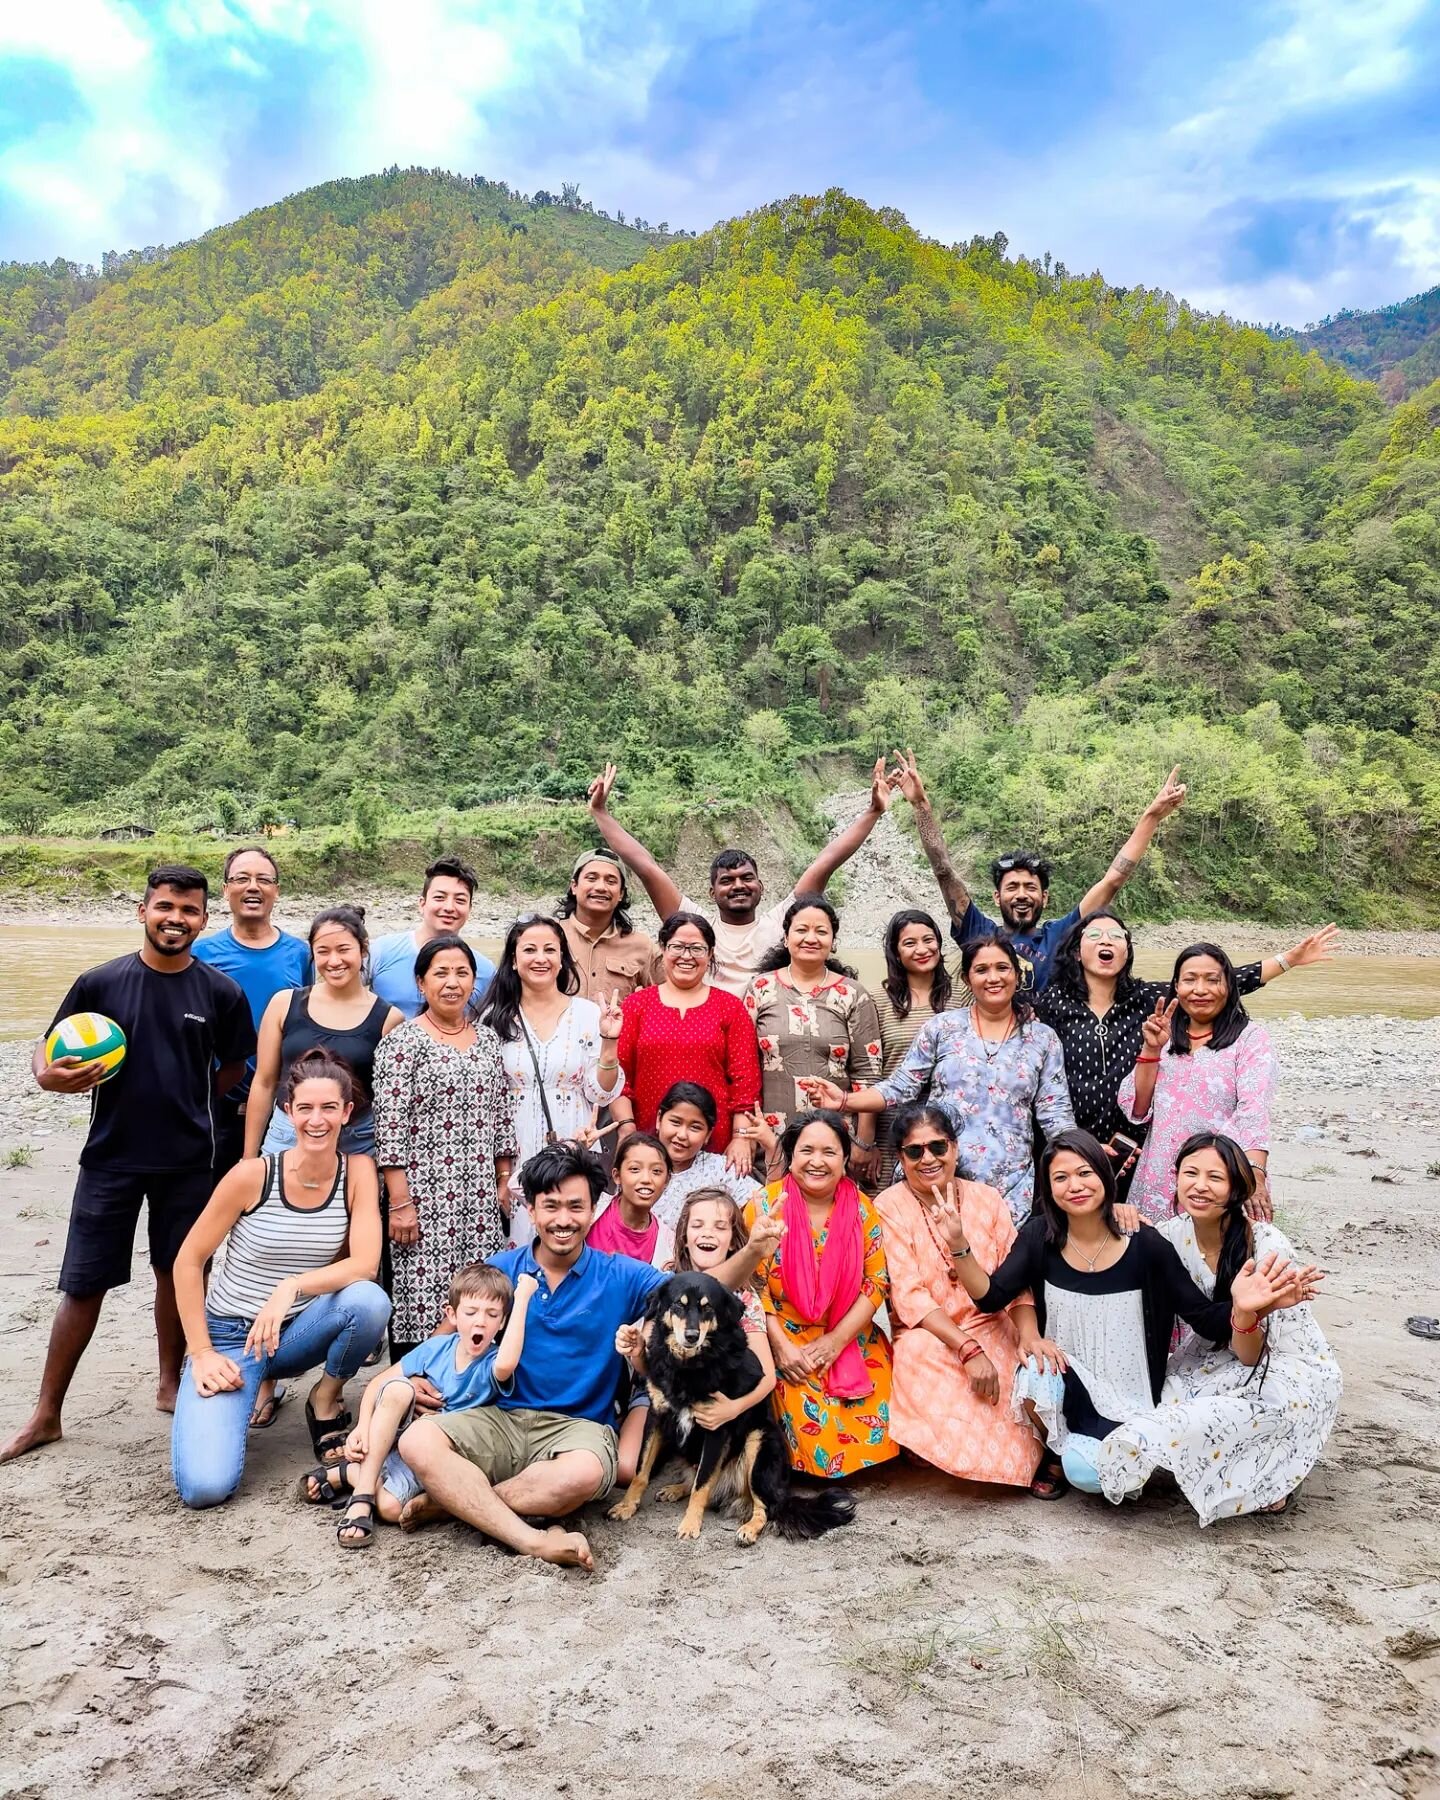 We feel so lucky and proud to have such a lovely team ! &hearts;️ Our yearly outing was also fantastic last weekend, with dances, games, laughs and beers 😊😎☀️. Cheers to you all, dear Cosy family !
-----
#cosynepal #cosynepalfamily #cosynepaldiarie